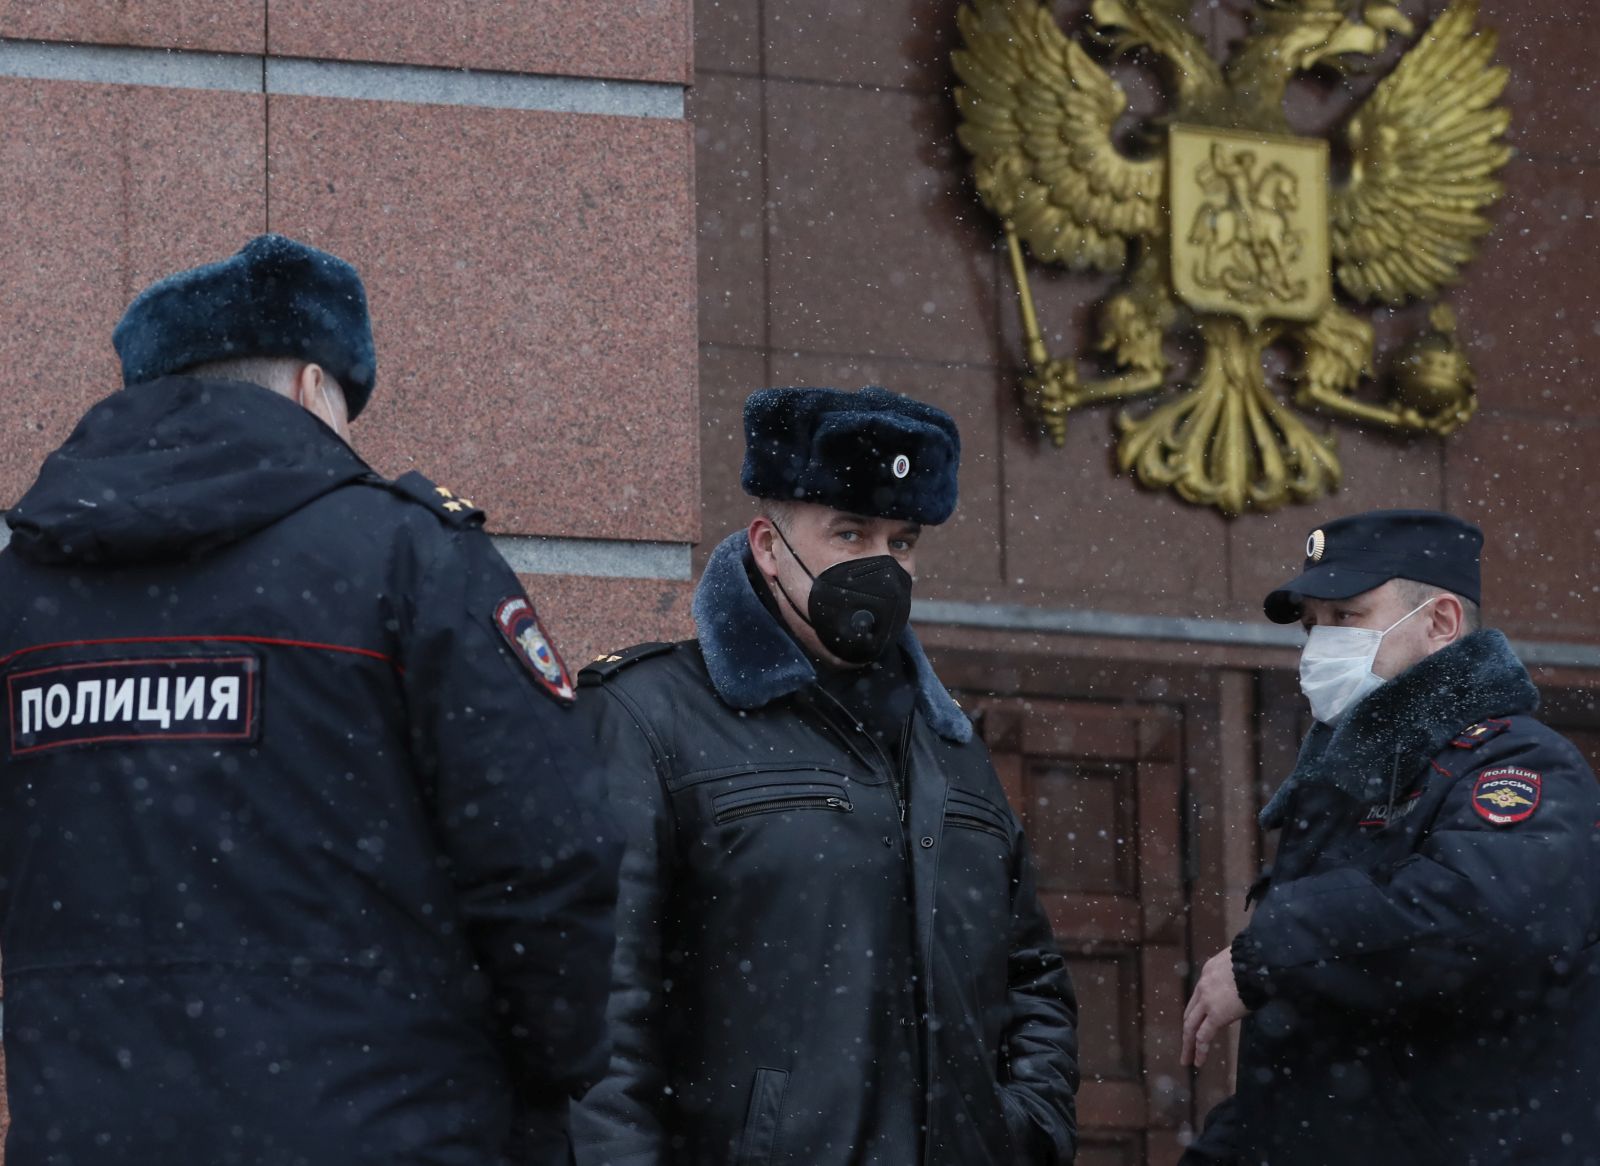 epa08970606 Russian police officers stand in front of the building of the Moscow Region Court in Krasnogorsk outside Moscow, Russia, 28 January 2021. Moscow Region Court will hear on 28 January 2021 an appeal against detention of an opposition leader Alexei Navalny who was detained after his arrival to Moscow from Germany on 17 January 2021. A Moscow judge on 18 January ruled that he will remain in custody for 30 days following his airport arrest.  EPA/YURI KOCHETKOV